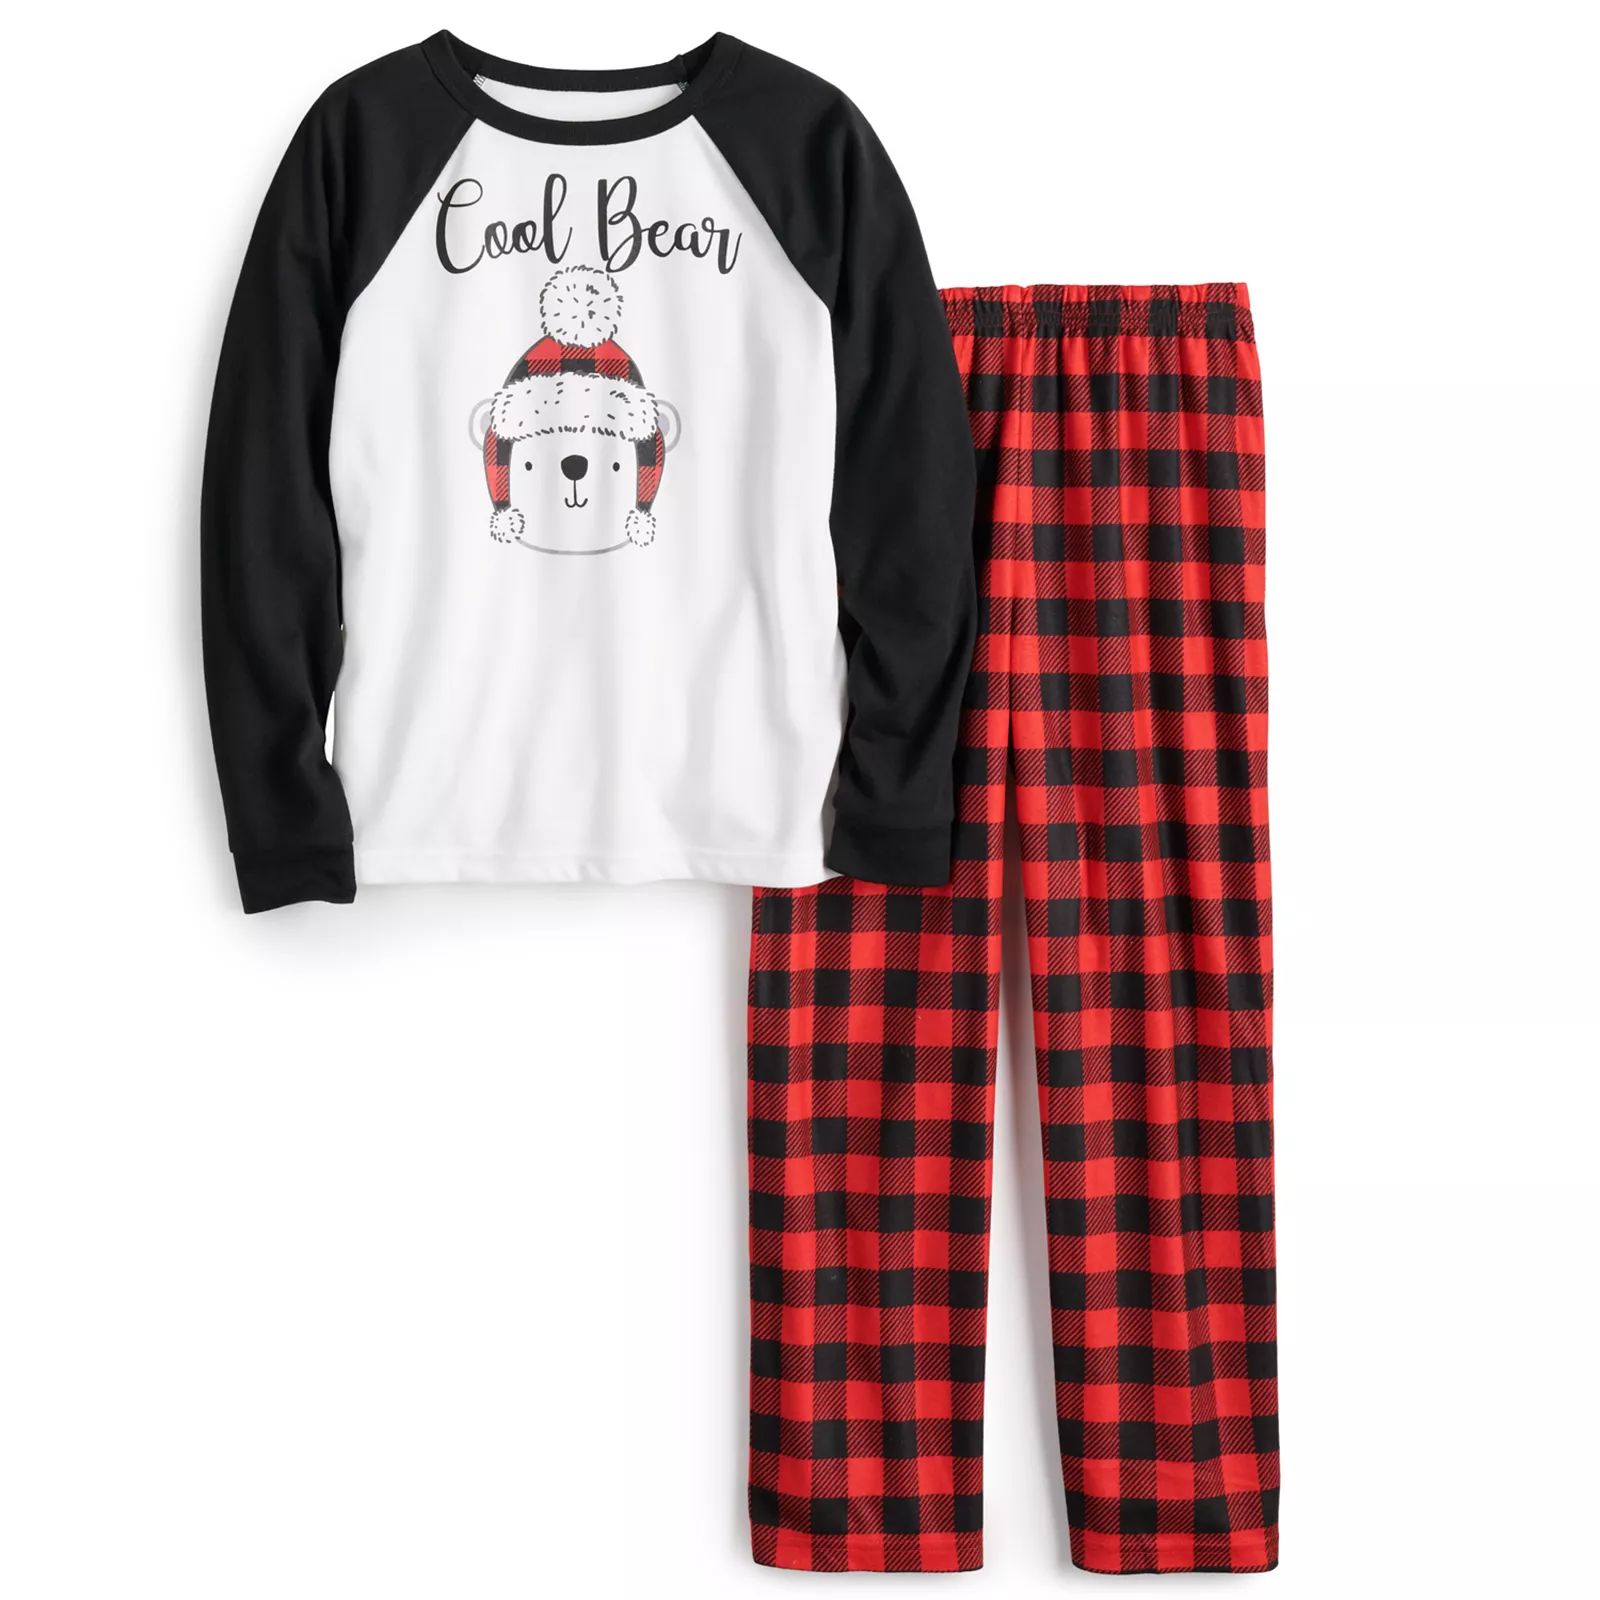 Boys 4-20 Jammies For Your Families Cool Bear Top & Plaid Pants Pajama Set by Cuddl Duds, Boy's, Siz | Kohl's